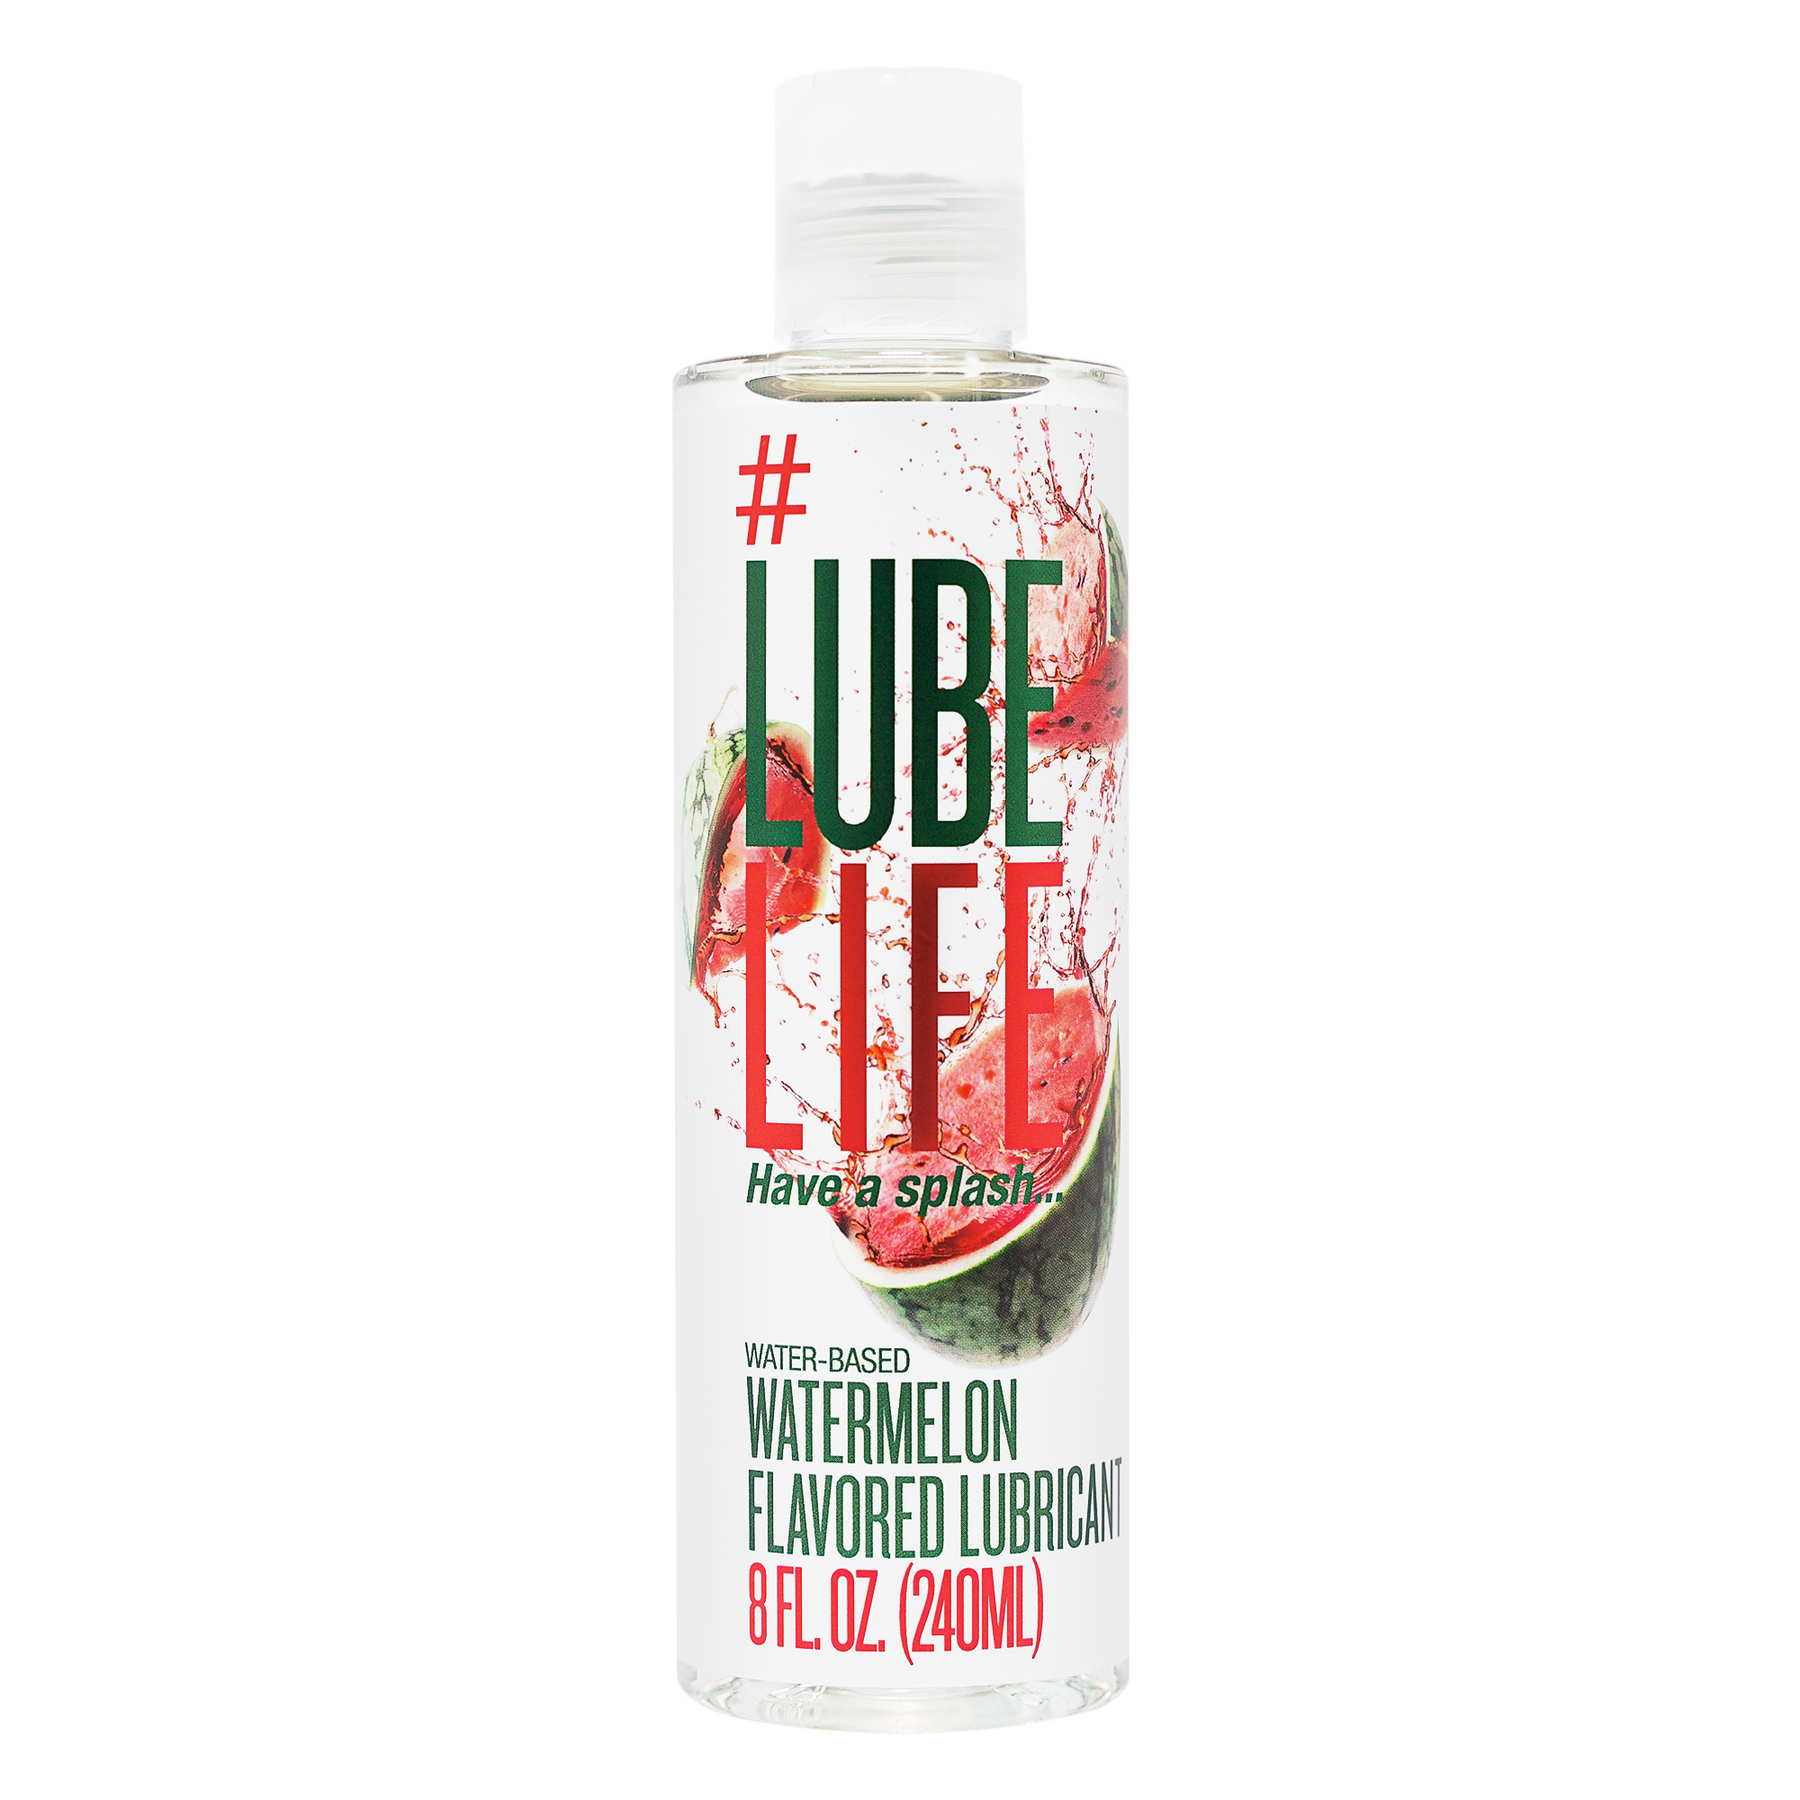 LubeLife Water-Based Personal Lubricant, Lube for Men, Women and